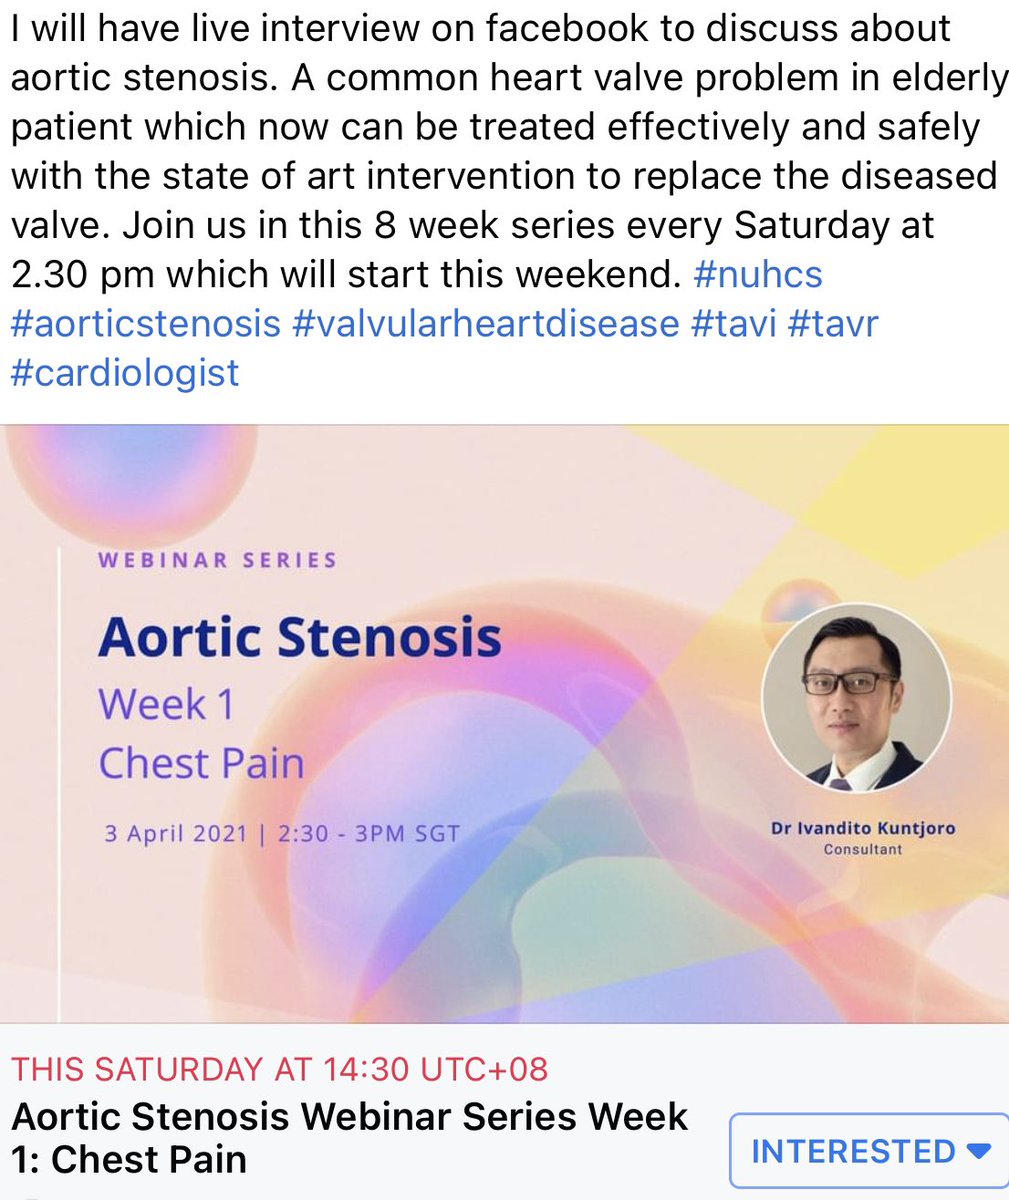 Facebook live series for Aortic Stenosis. #nuhcs #aorticstenosis #structuralheartdisease #TAVR